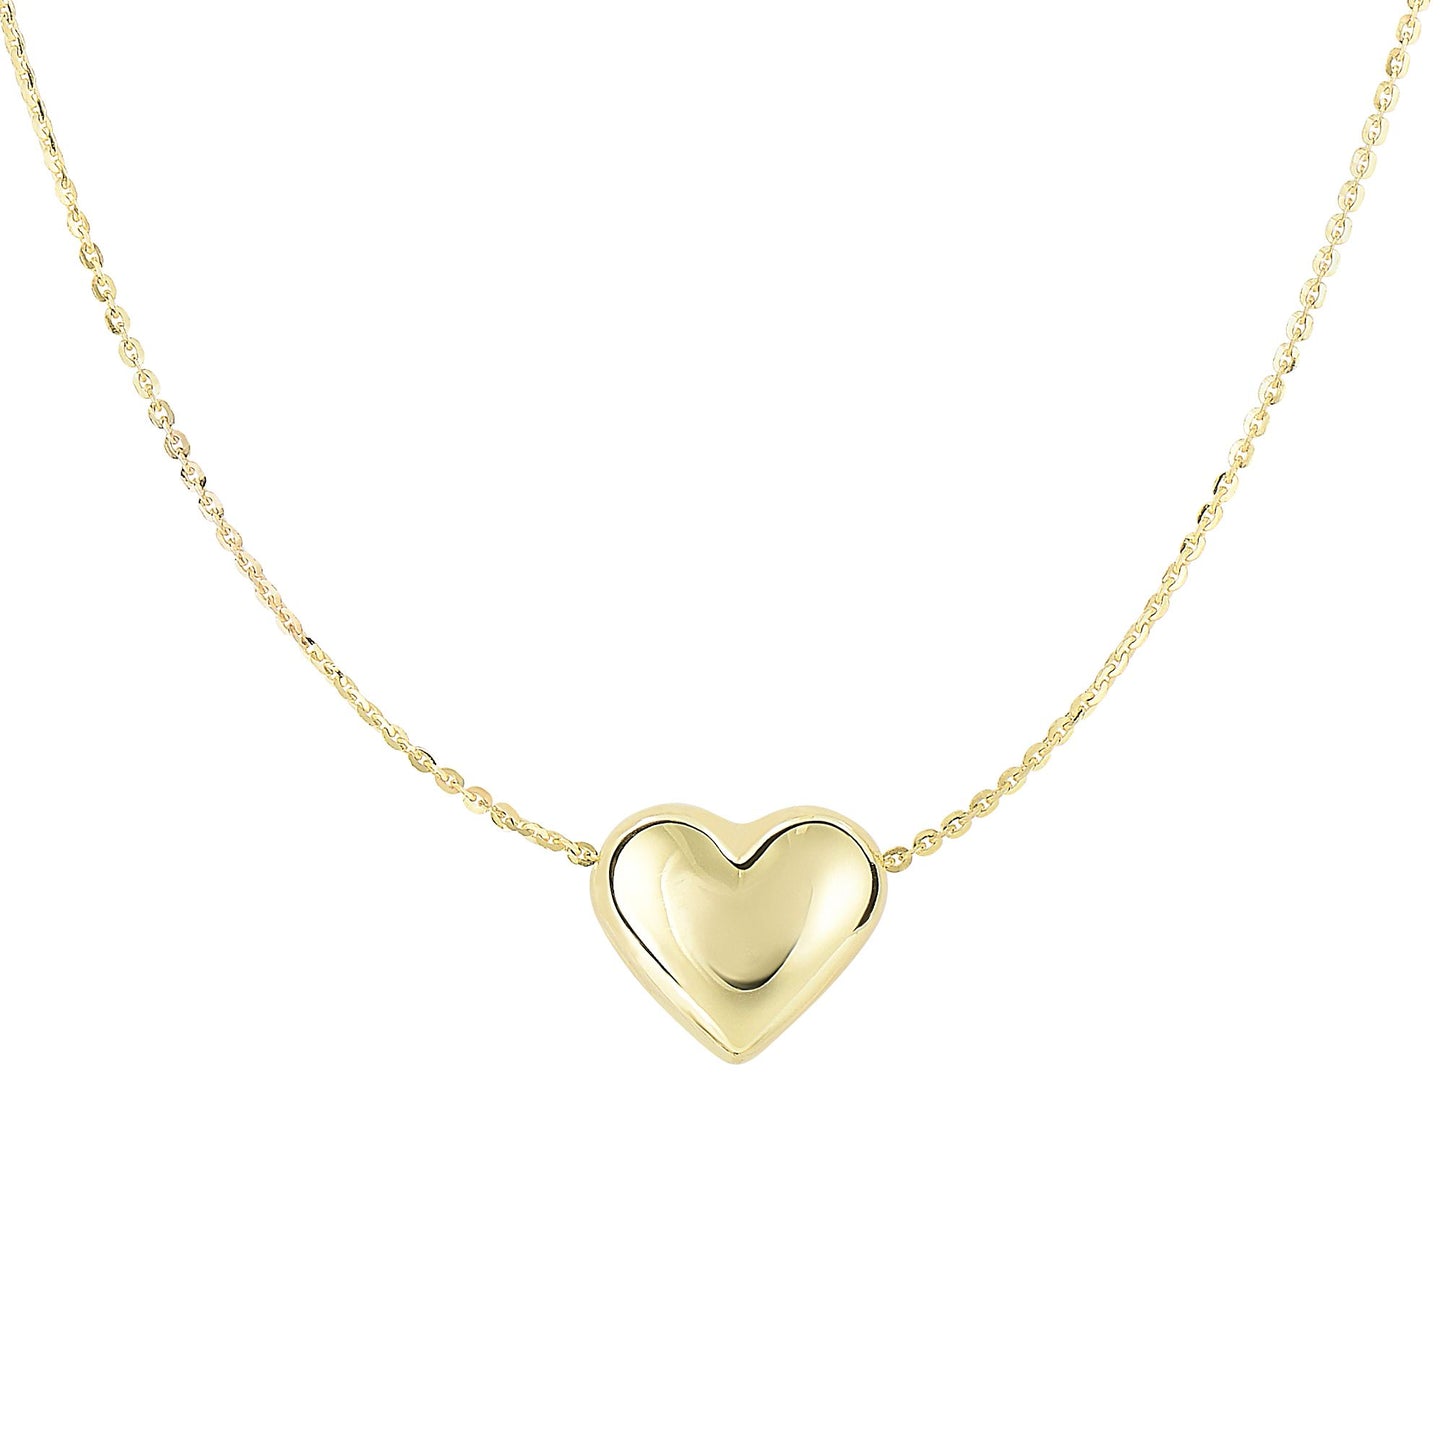 High Polished 14K Gold Puffed Heart Charm Pendant Necklace